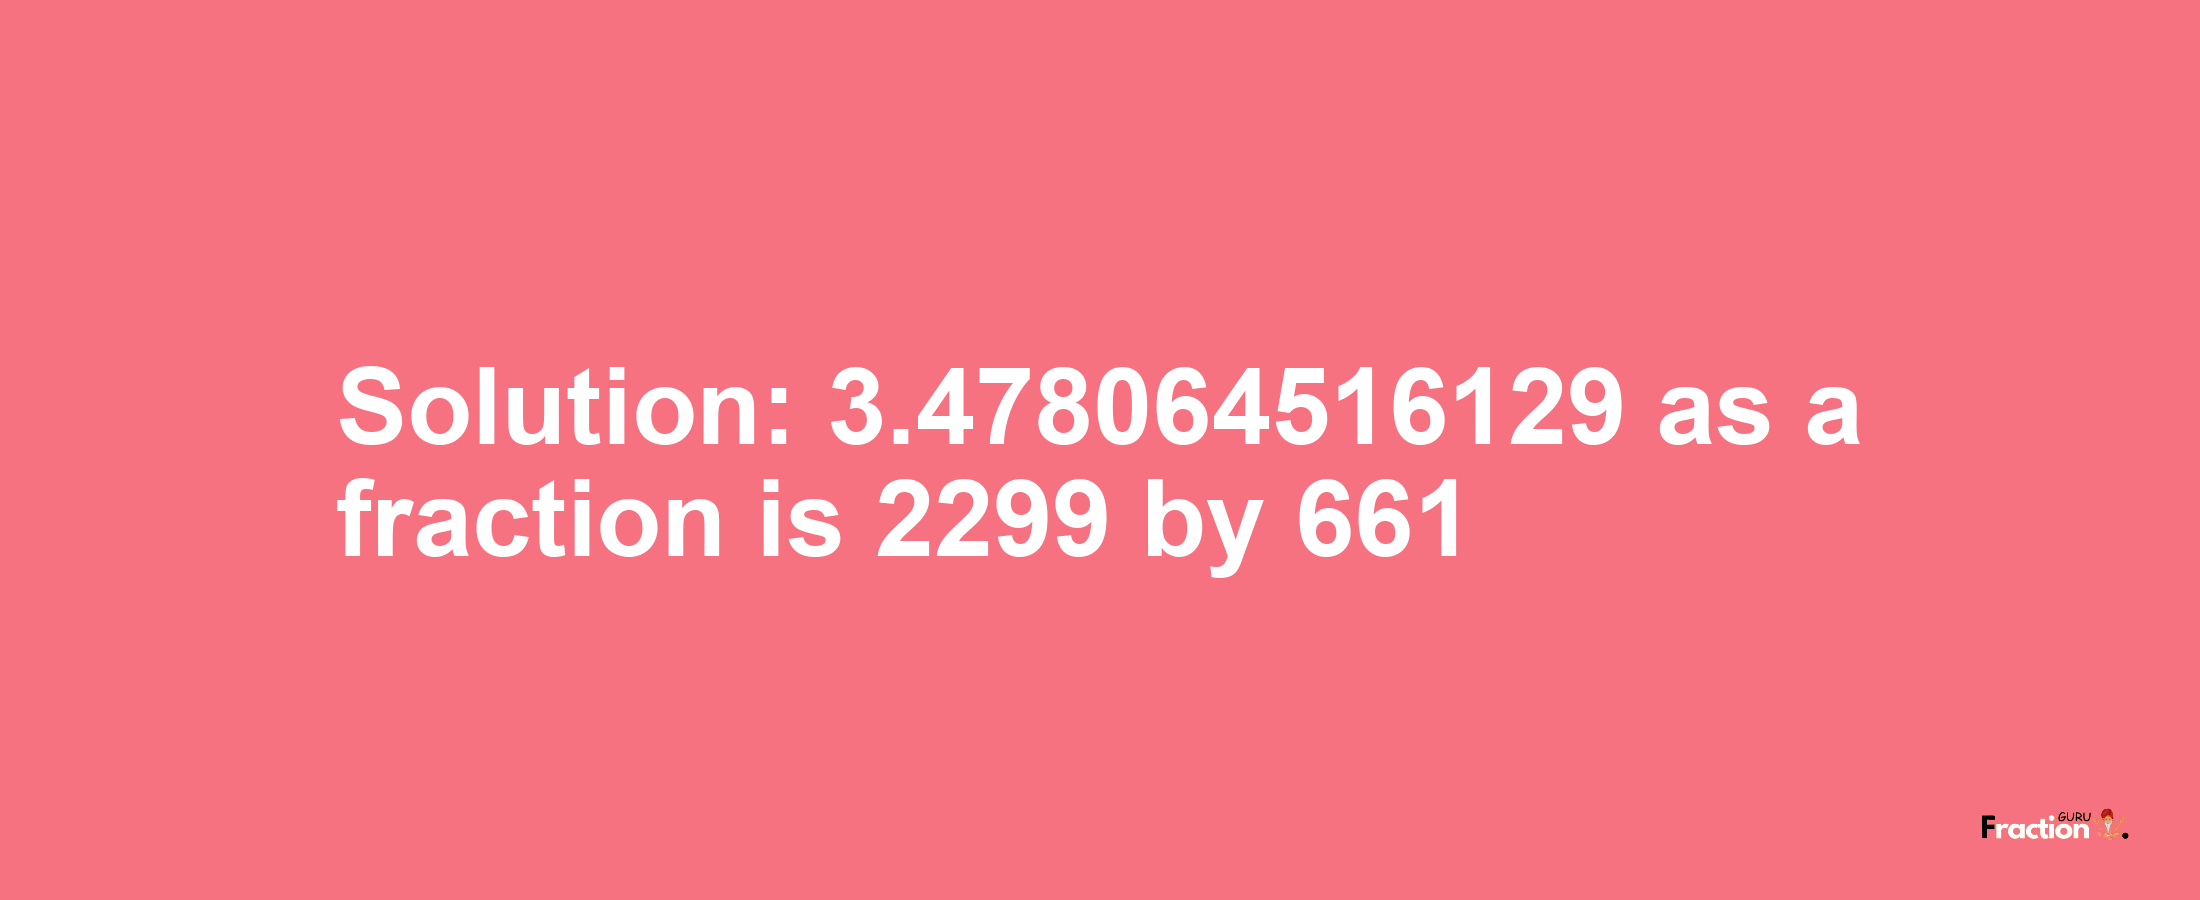 Solution:3.478064516129 as a fraction is 2299/661